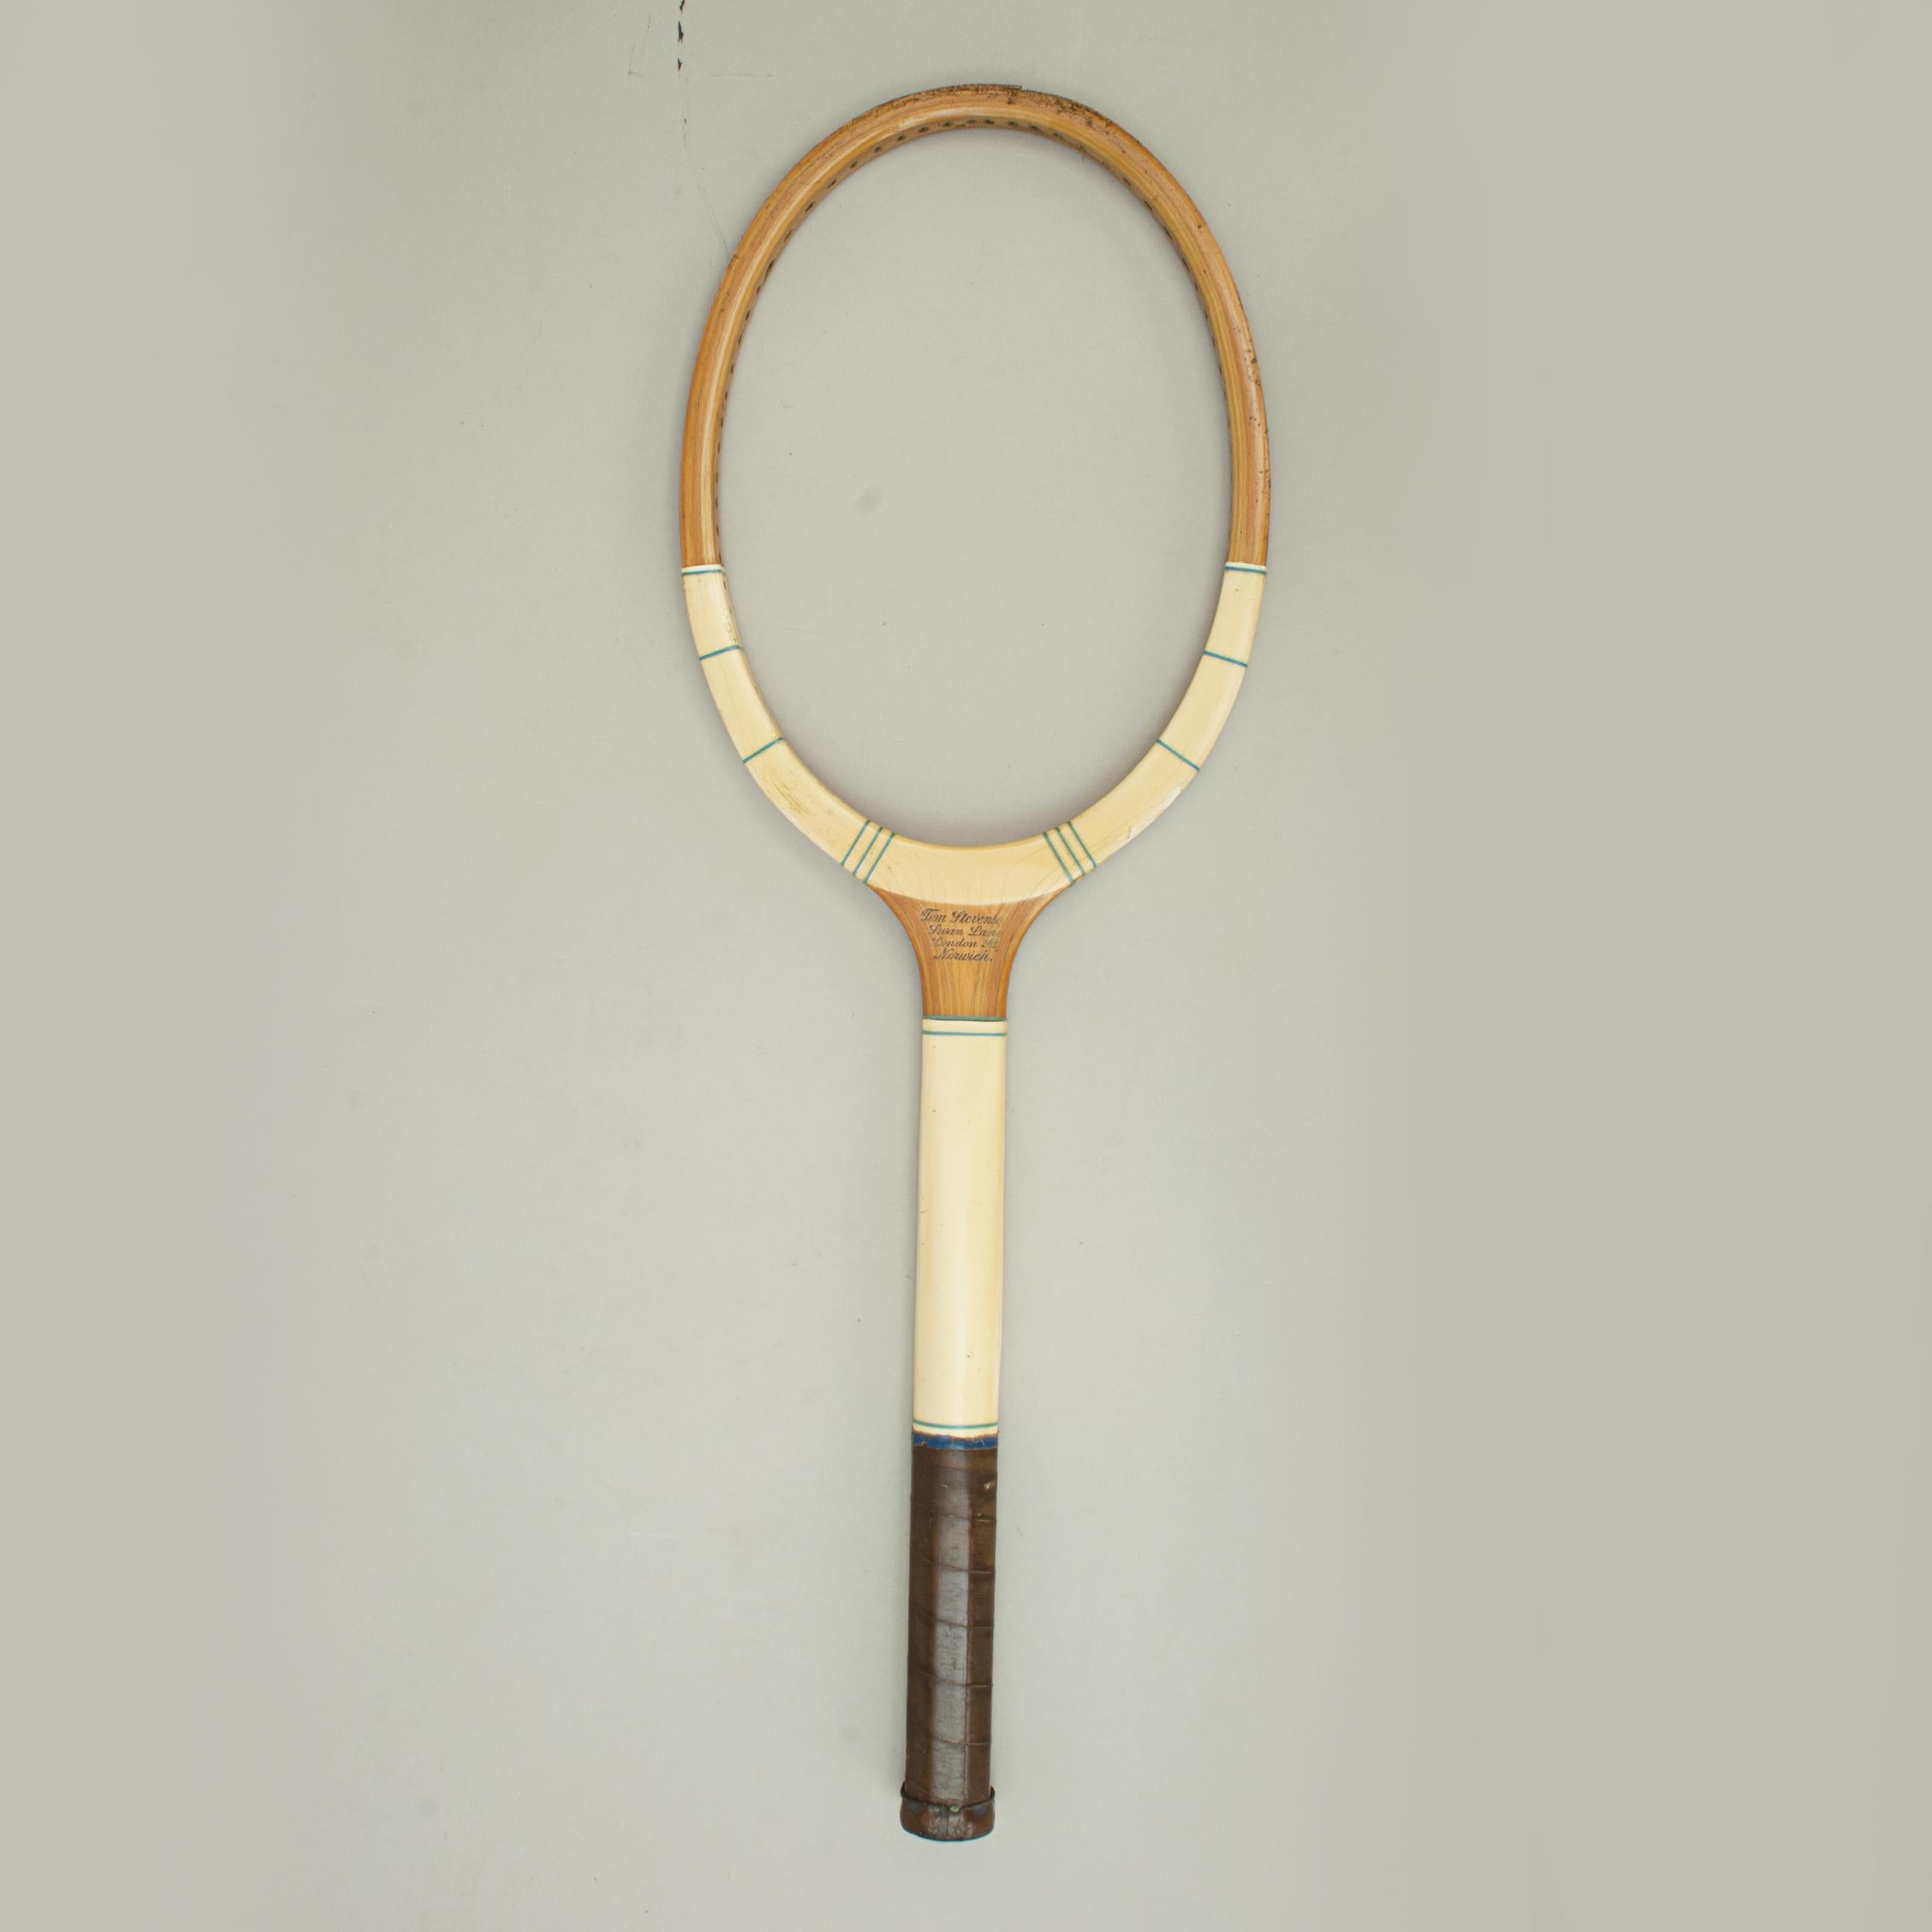 Vintage Lawn Tennis Racket, the Test by Stevenson For Sale 8